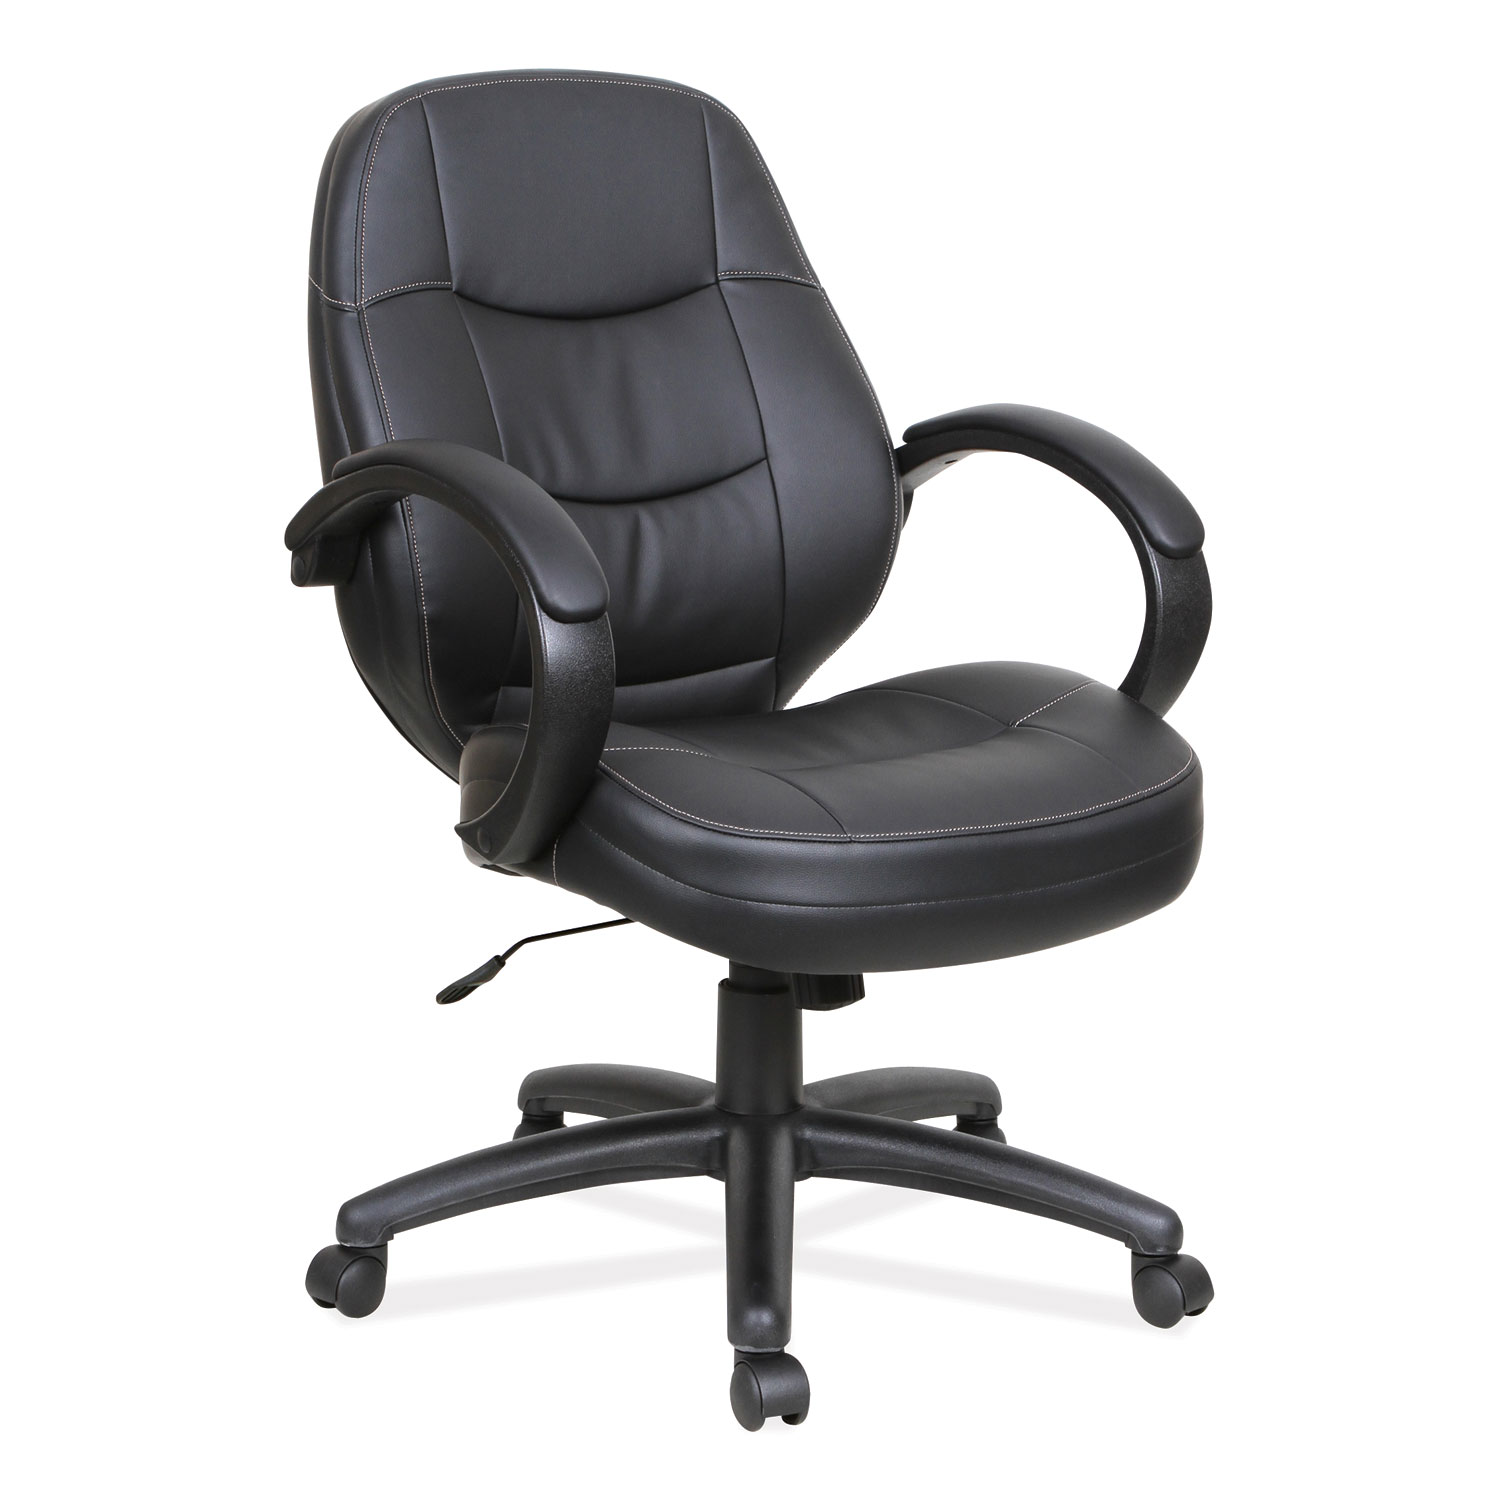 Alera PF Series Mid-Back Leather Office Chair, Supports up to 275 lbs., Black Seat/Black Back, Black Base